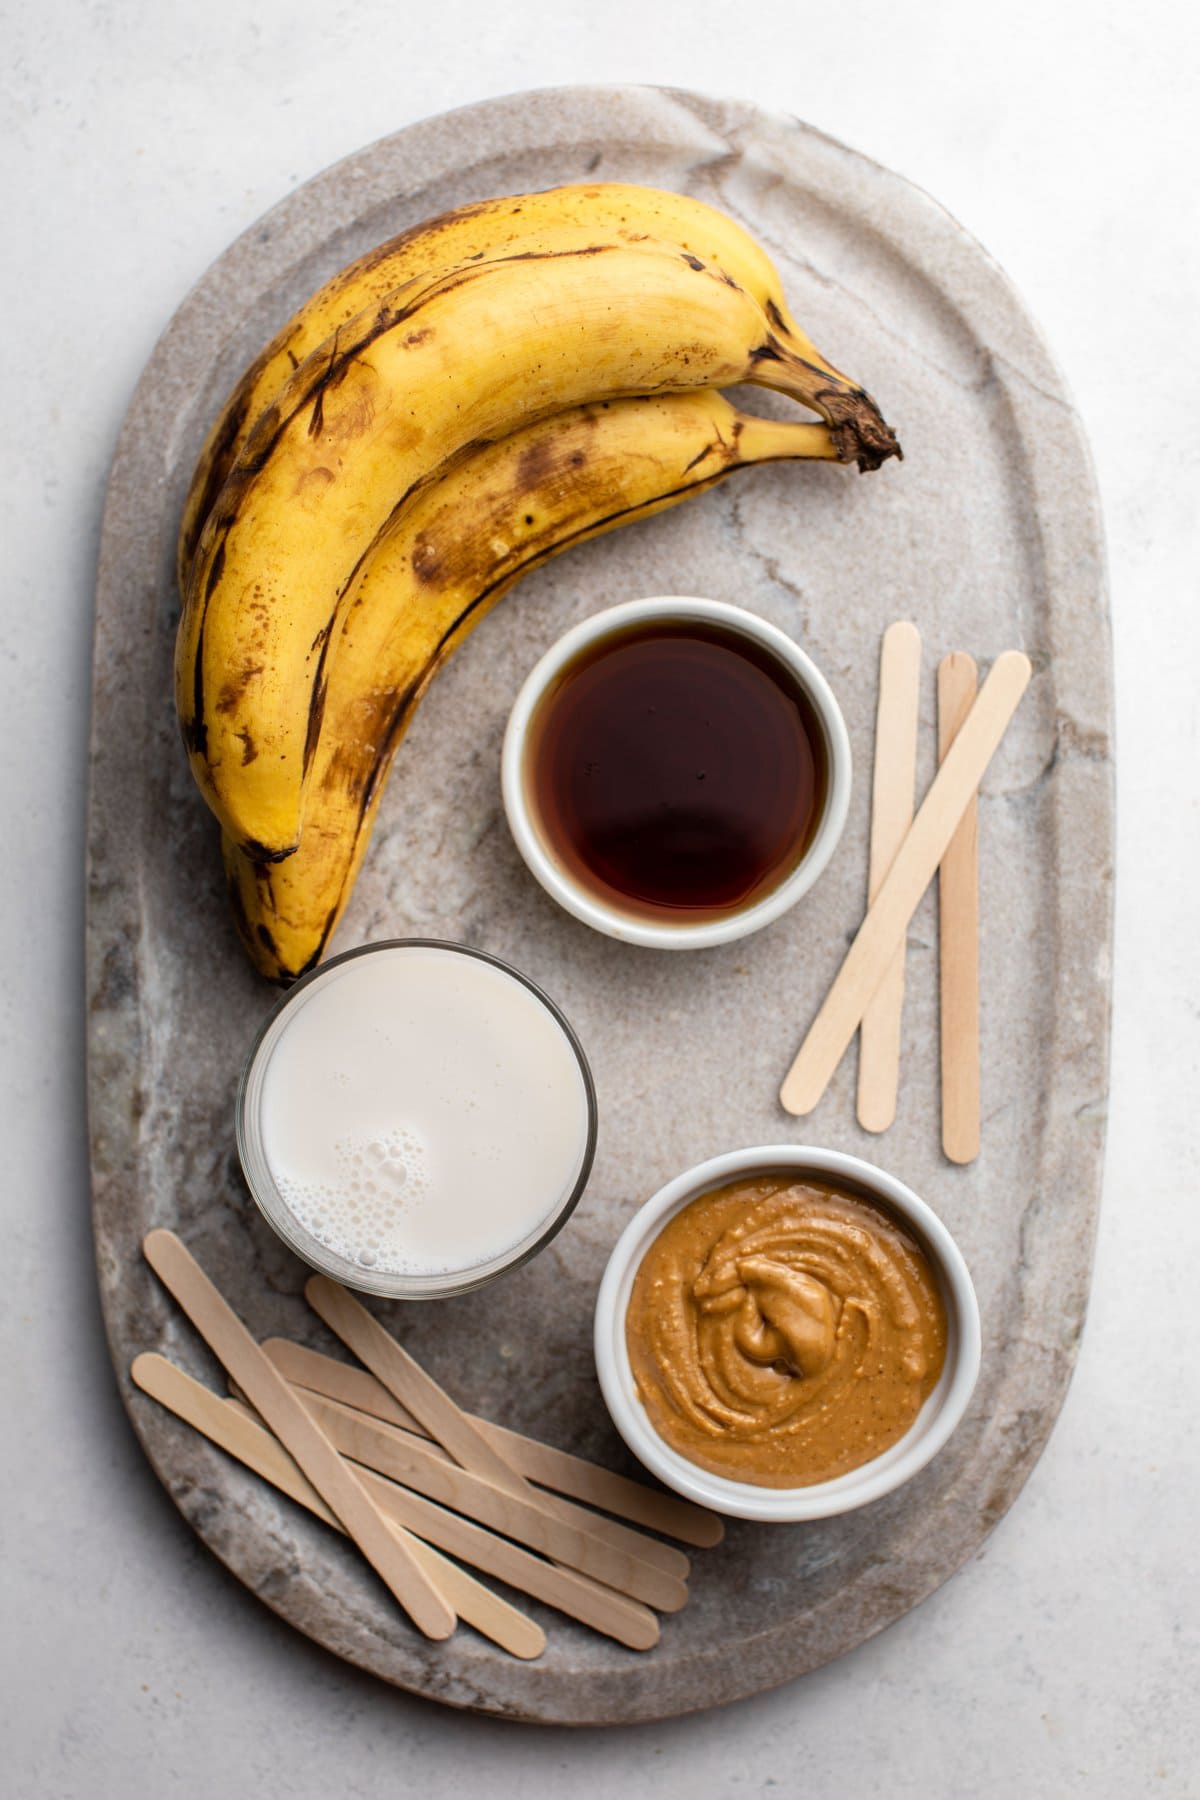 ingredients for peanut butter banana popsicles on stone serving board